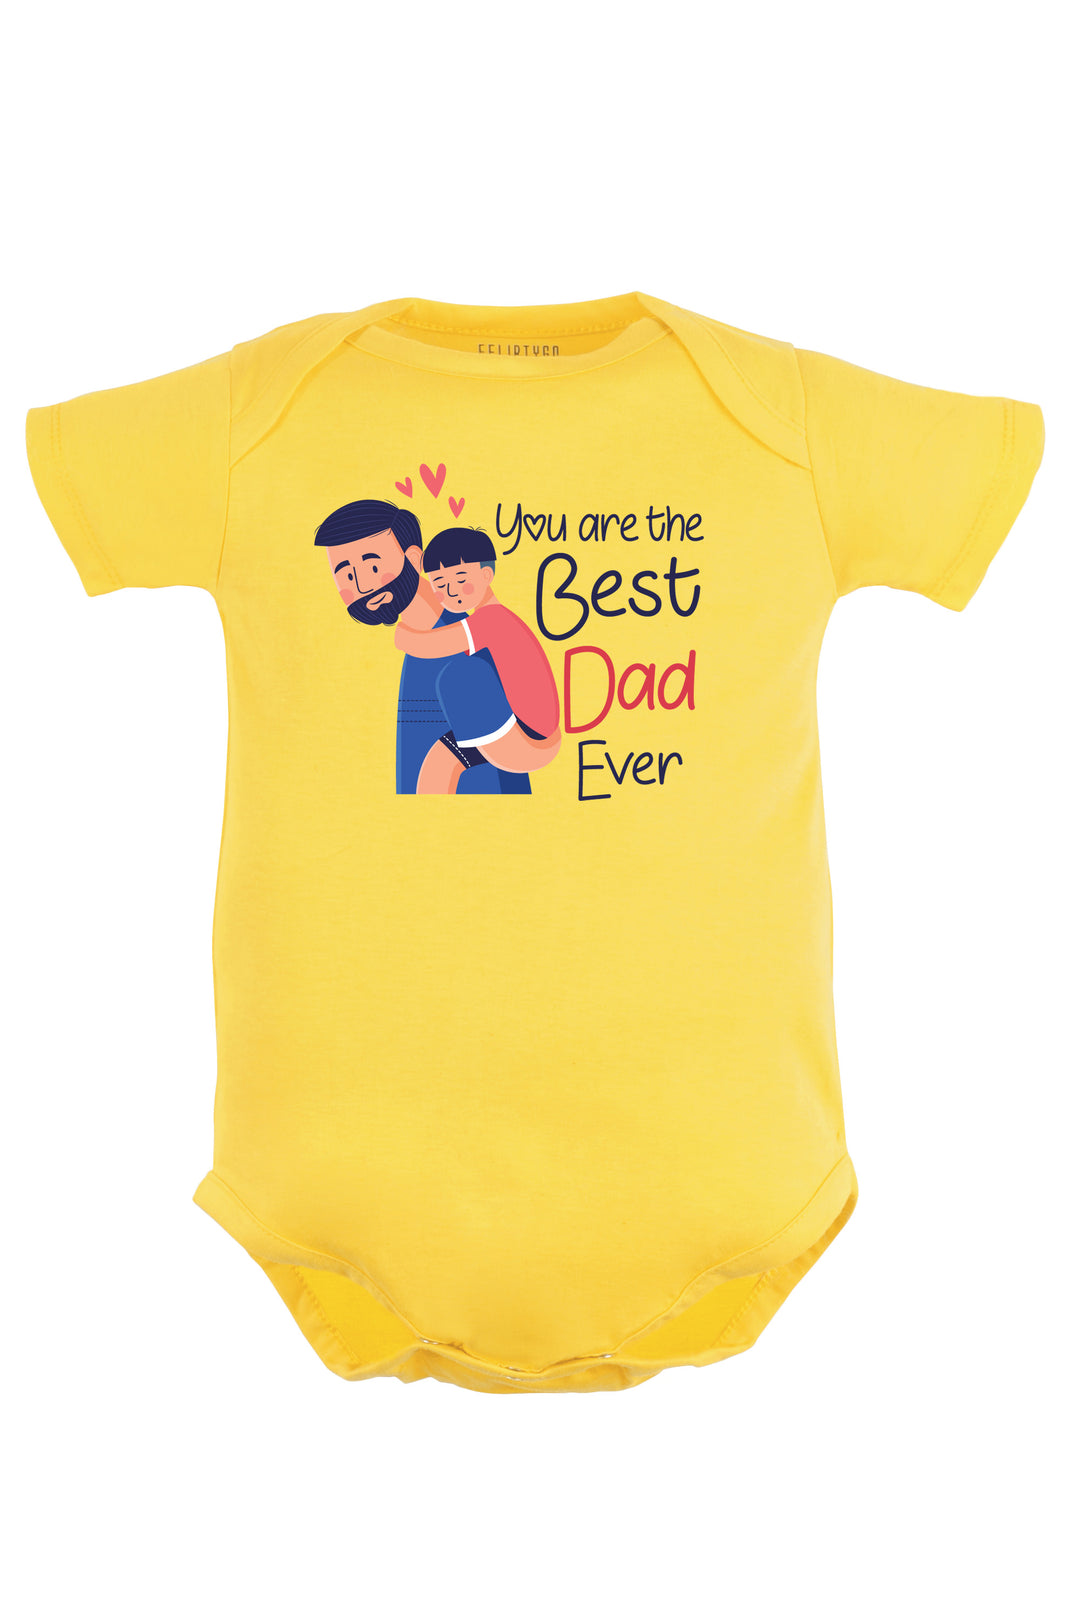 You Are the Best Dad Ever (Boy) Baby Romper | Onesies